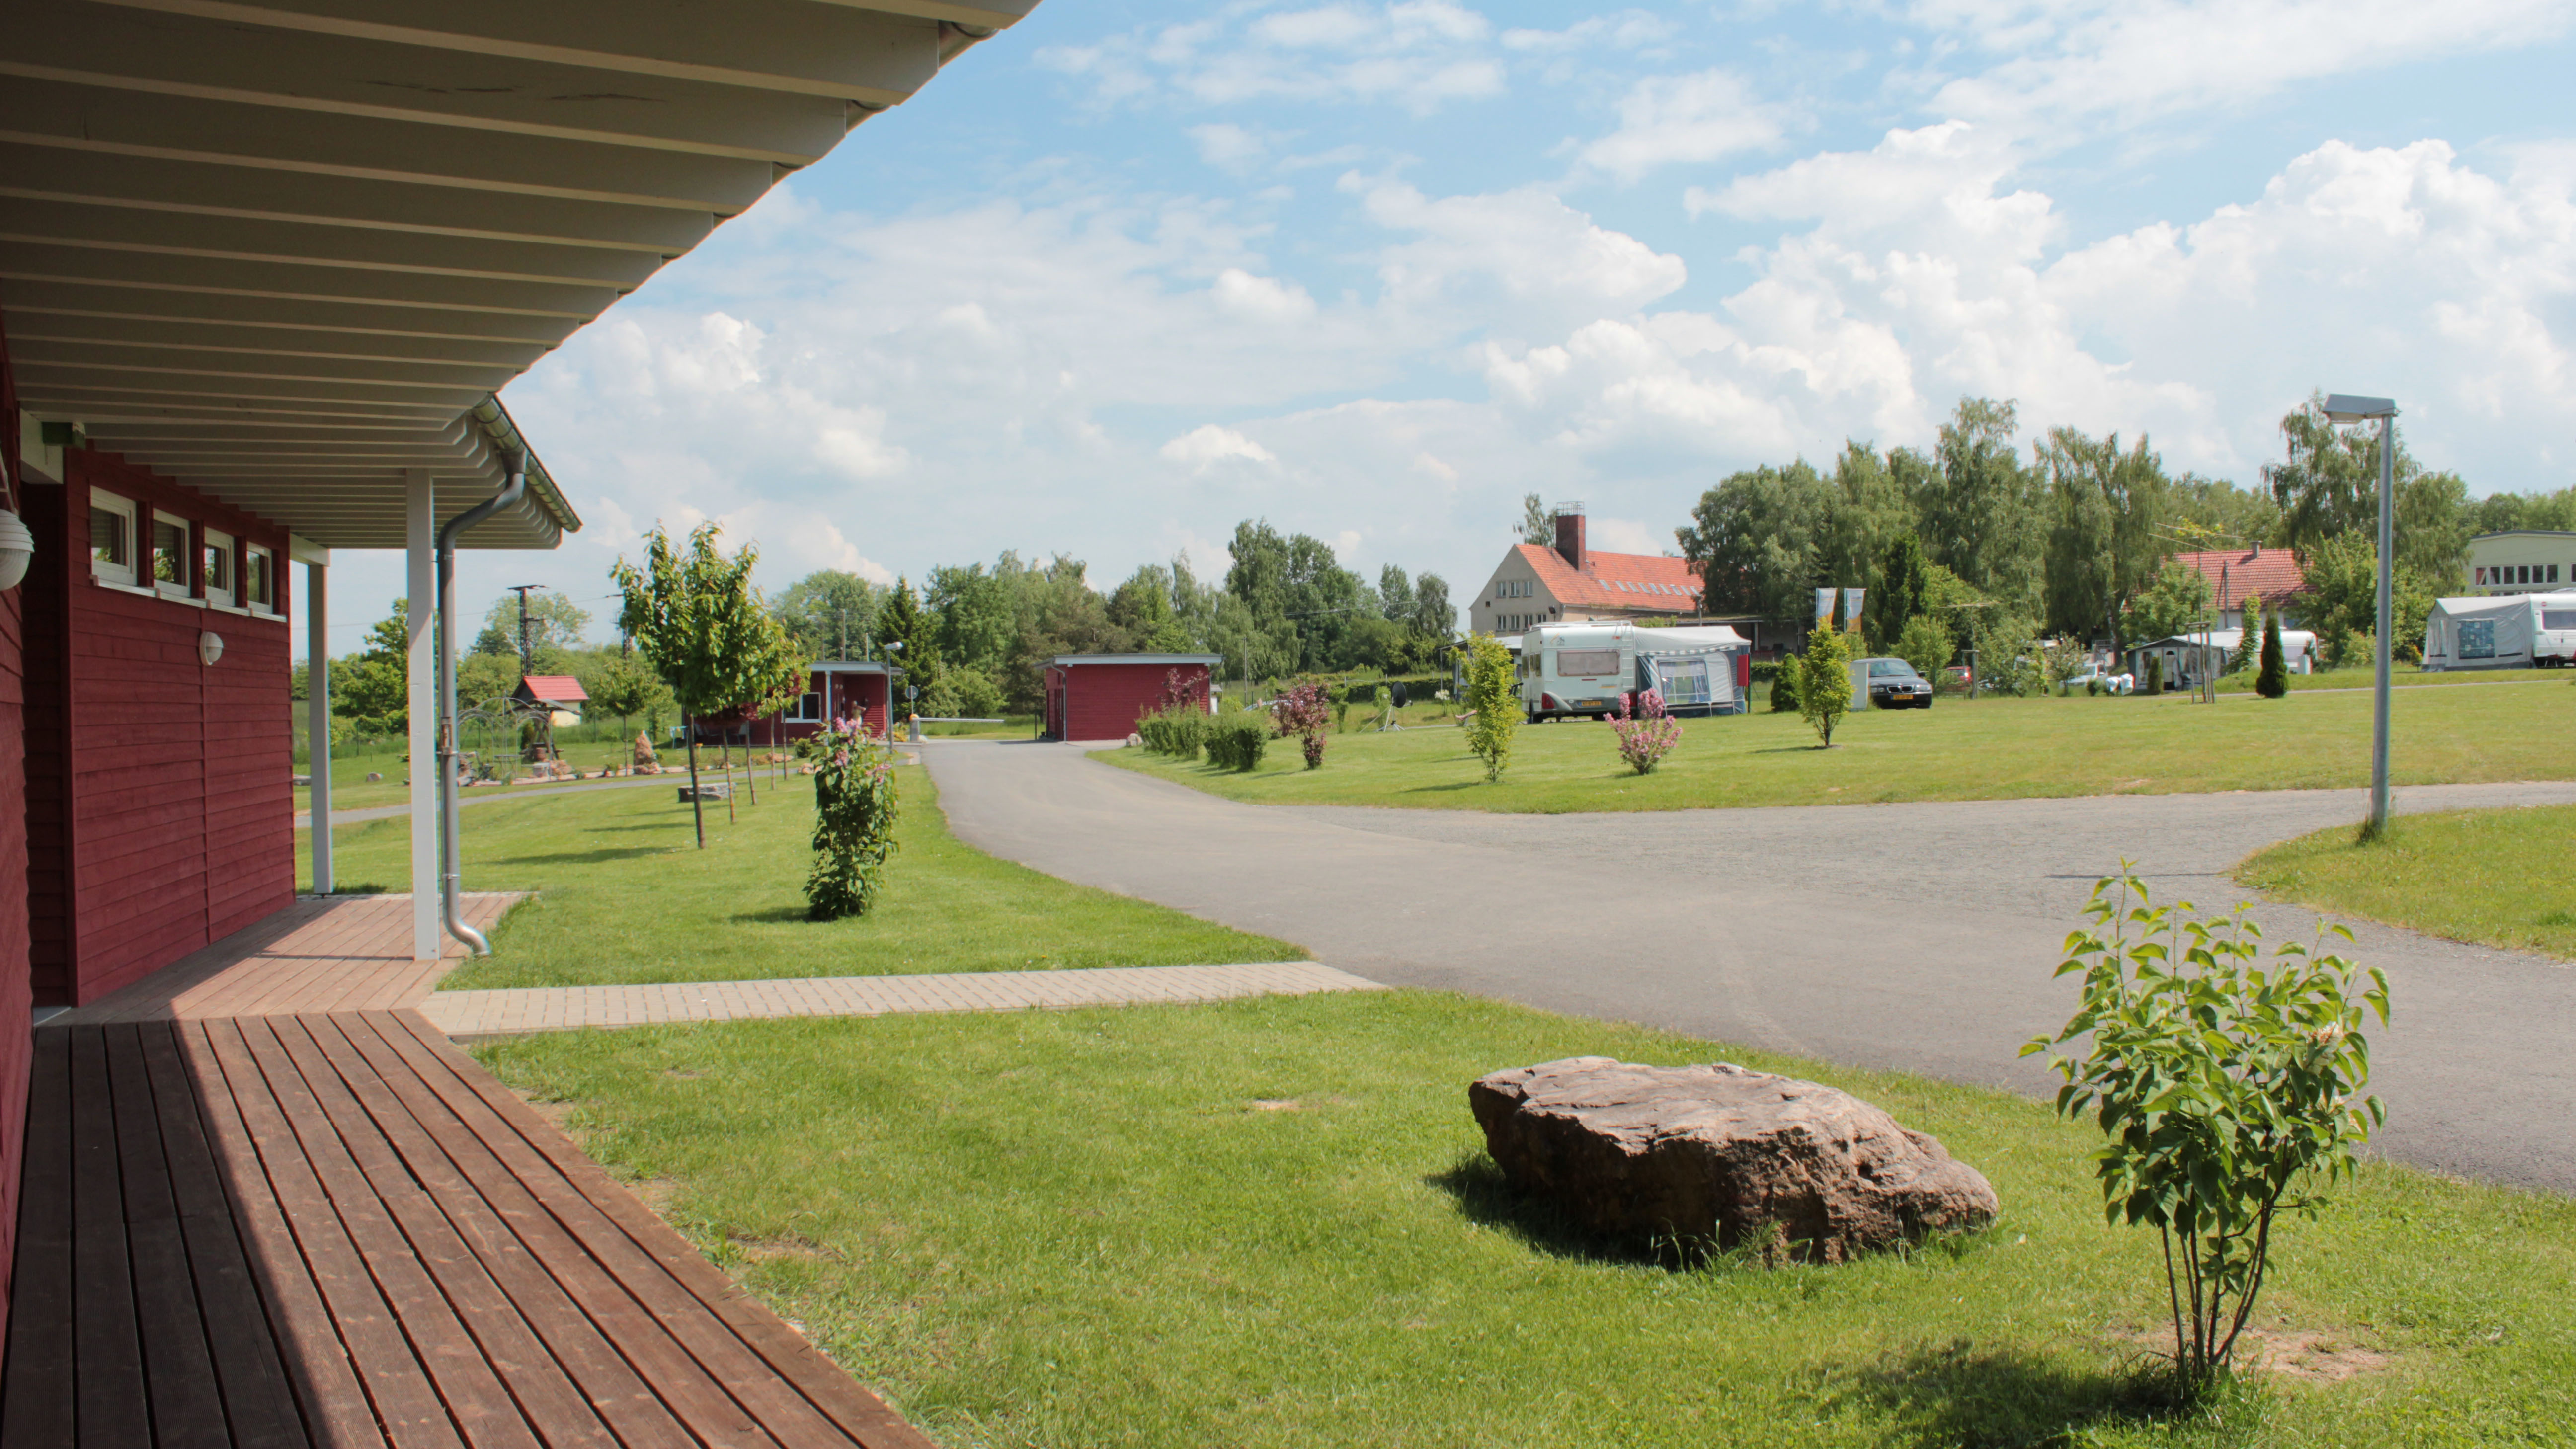 Camping site at the gateway to the Hainich